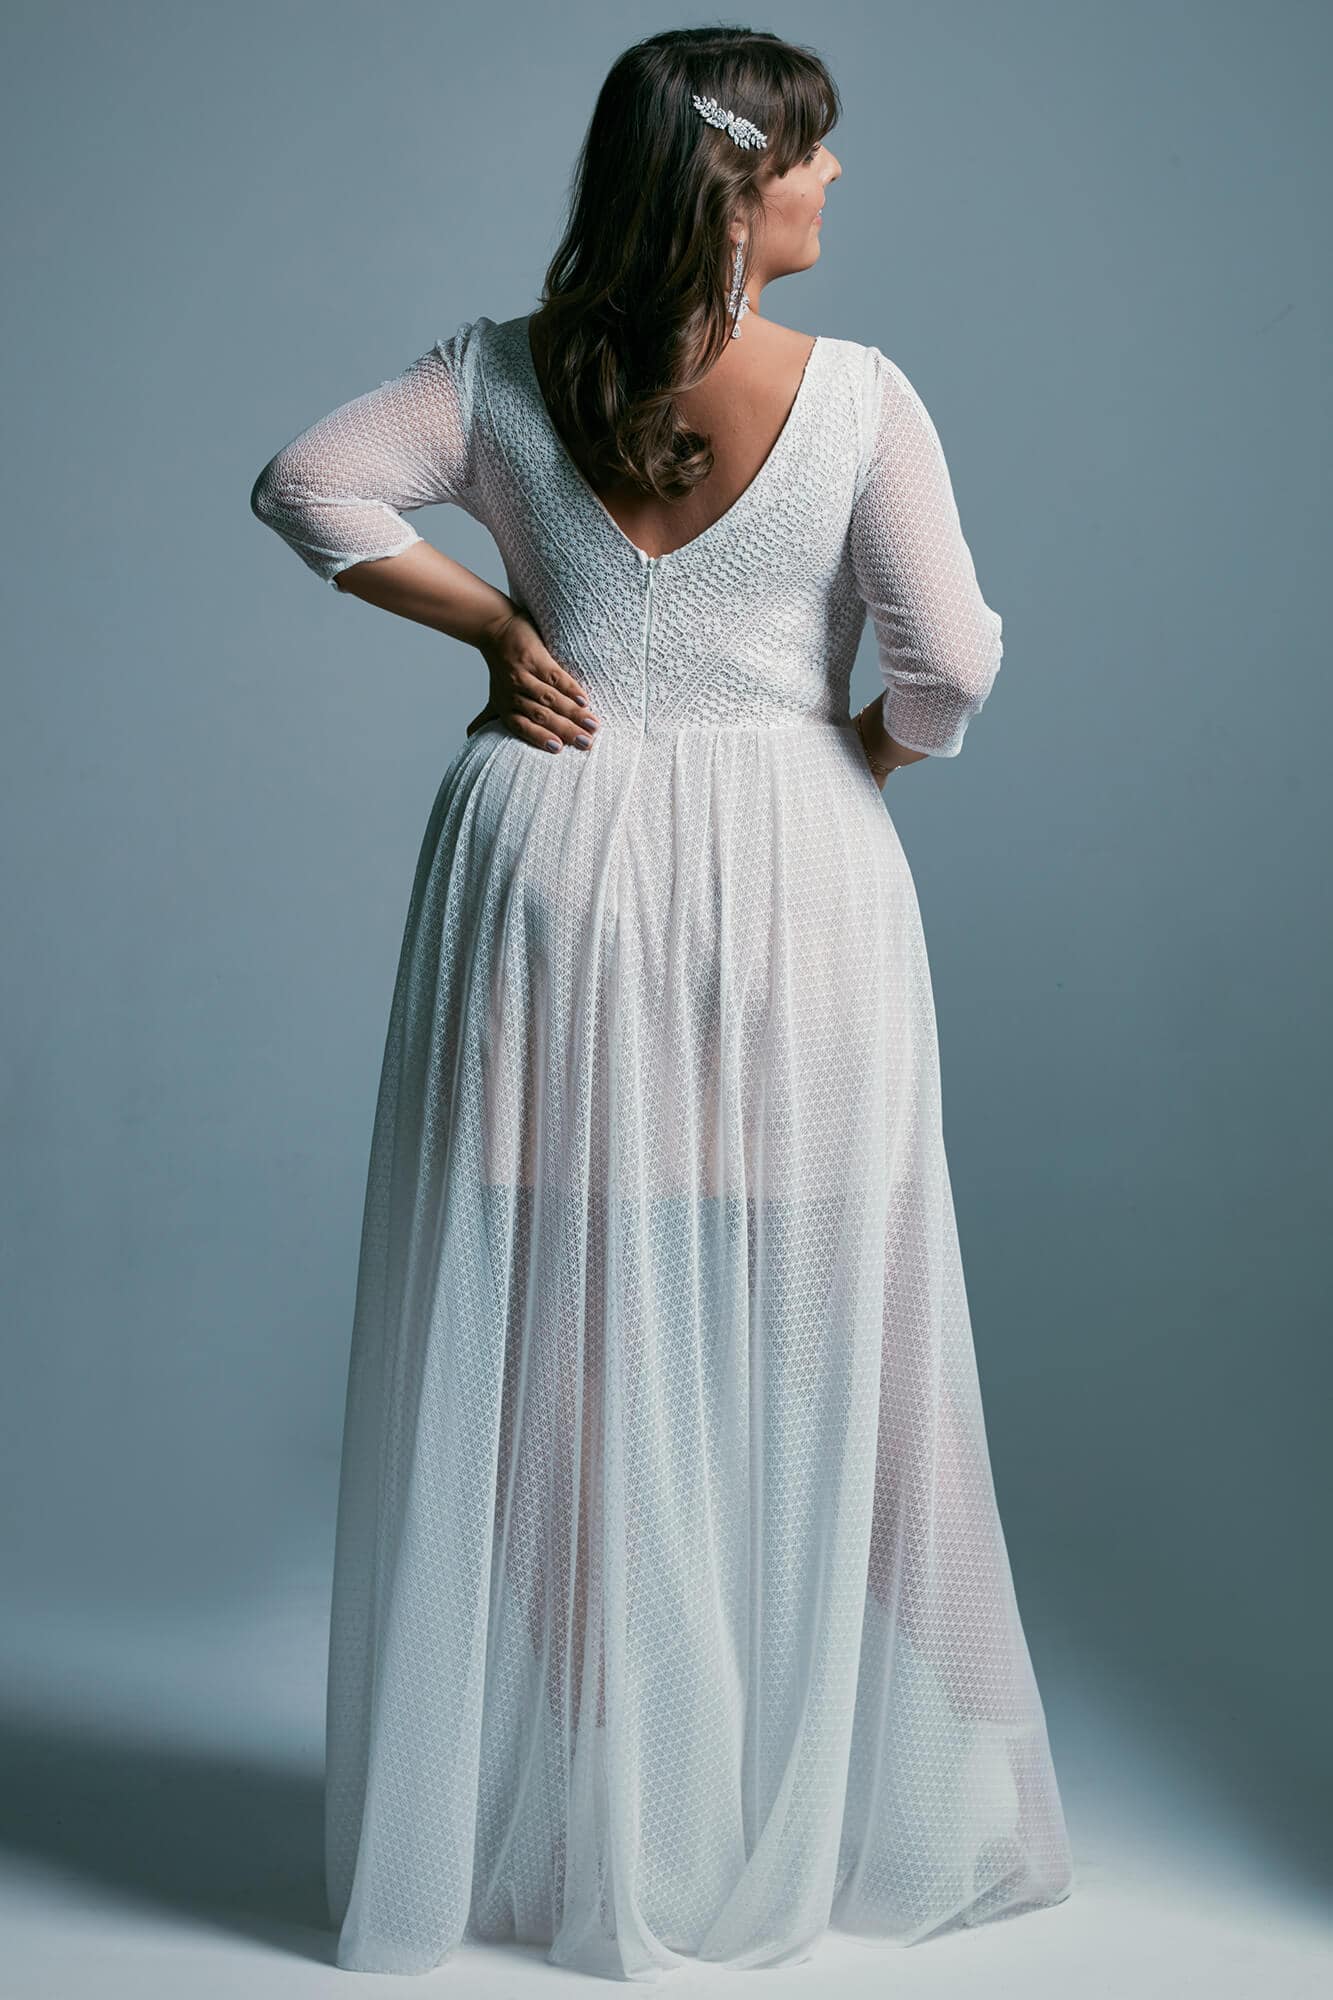 Plus size wedding dress with 3/4 sleeves and a boat neckline Santorini 7 plus size